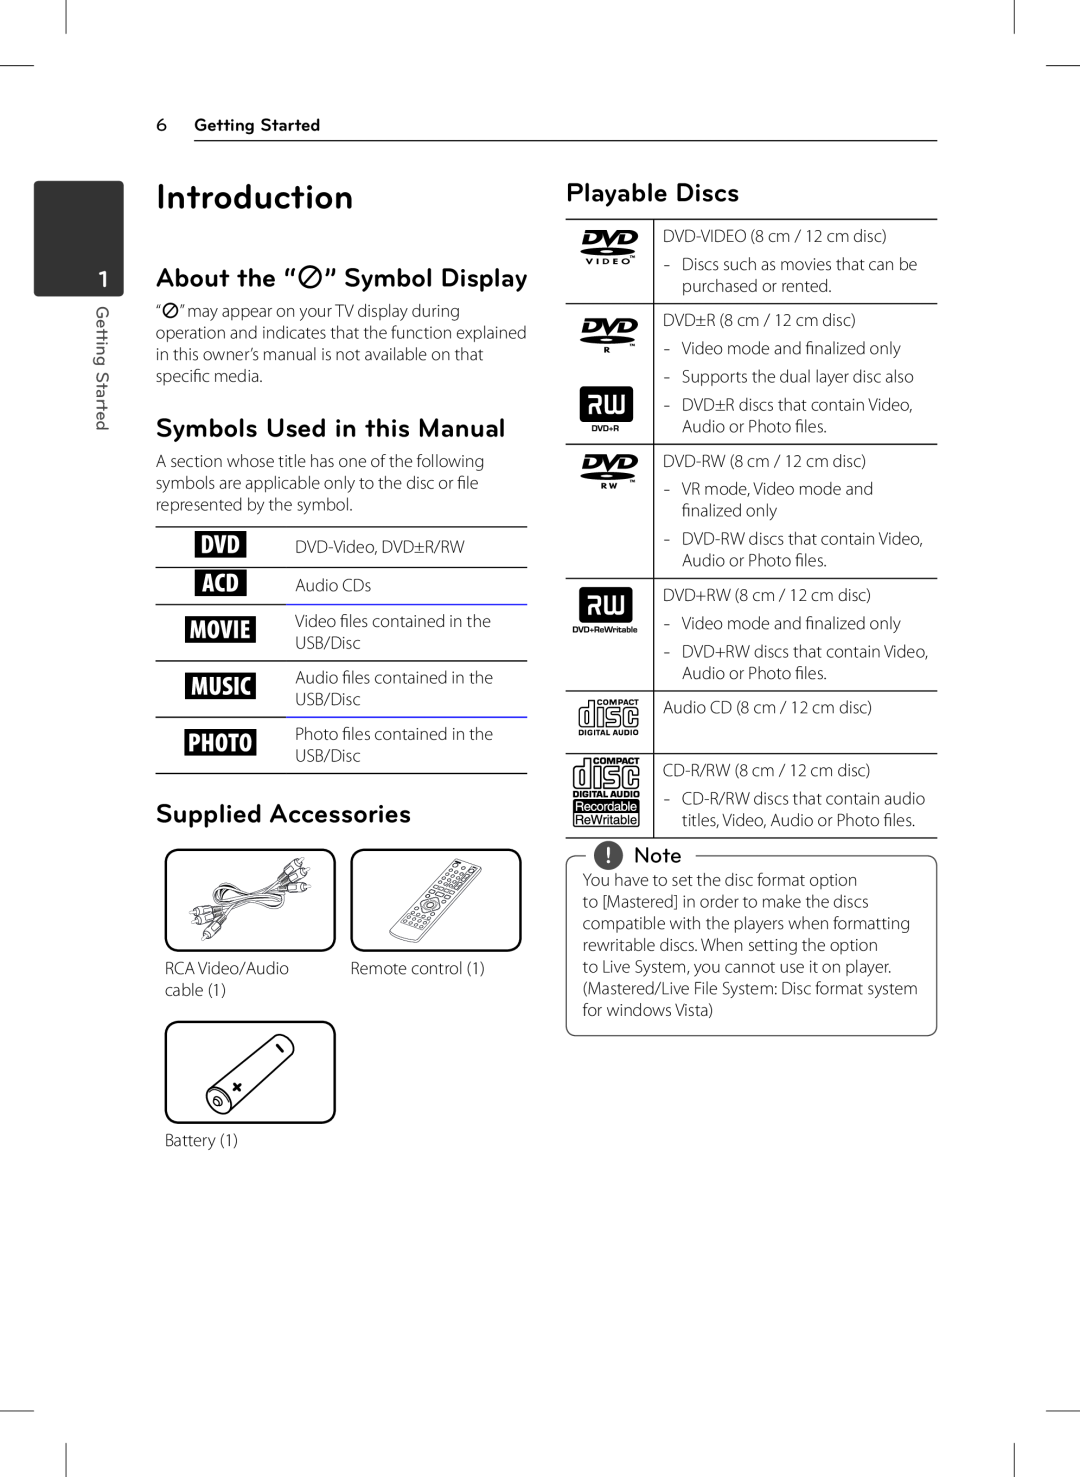 LG Electronics DVT699H Introduction, About the “7” Symbol Display, Symbols Used in this Manual, Supplied Accessories 